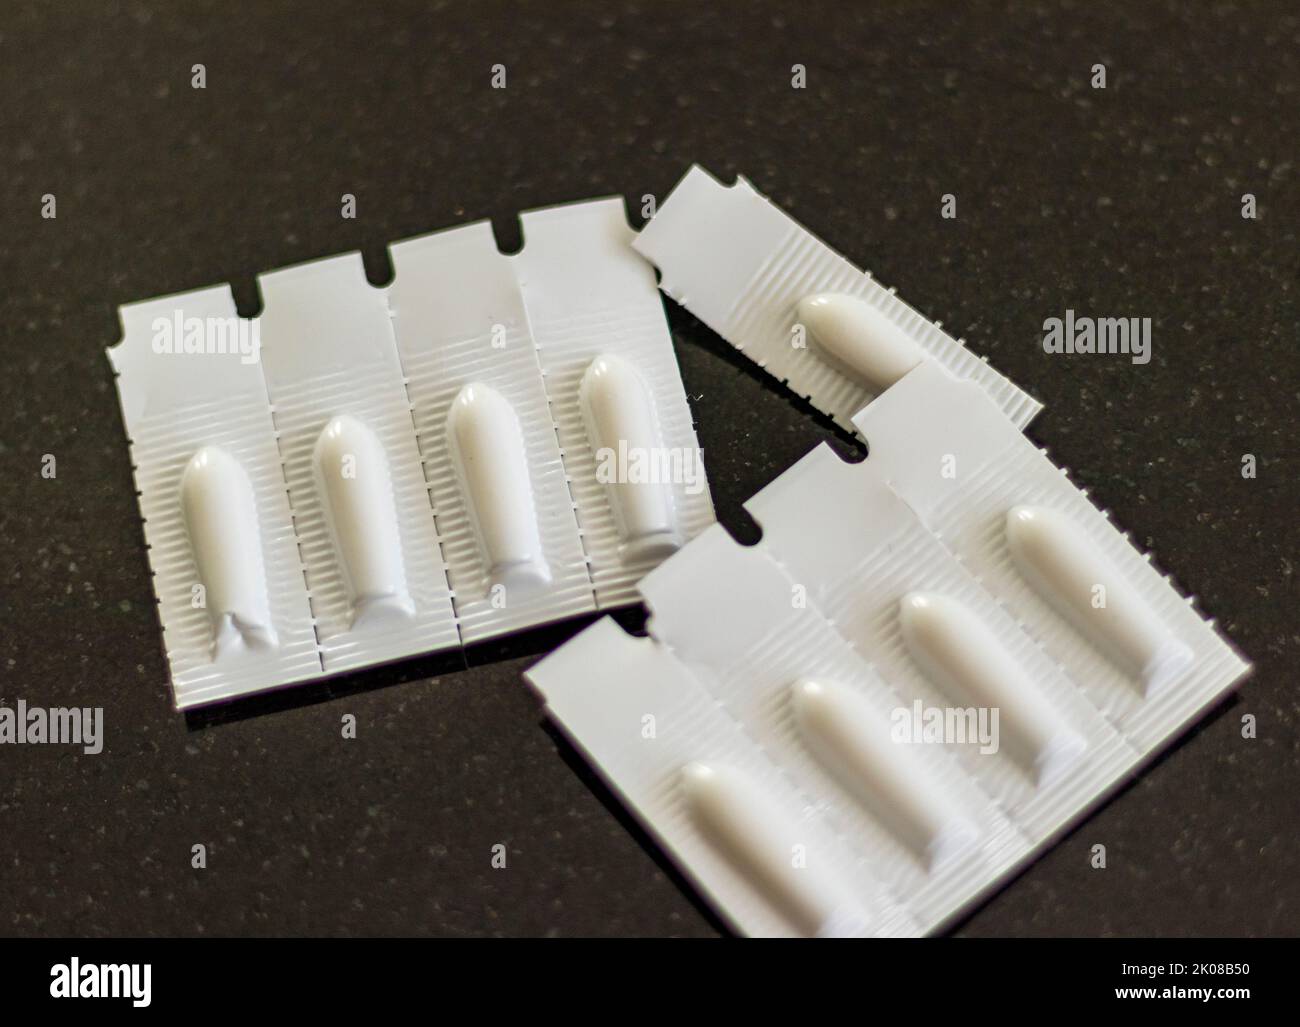 Dulcolax Laxative Suppositories Stock Photo - Download Image Now - Box -  Container, Business, Comfortable - iStock